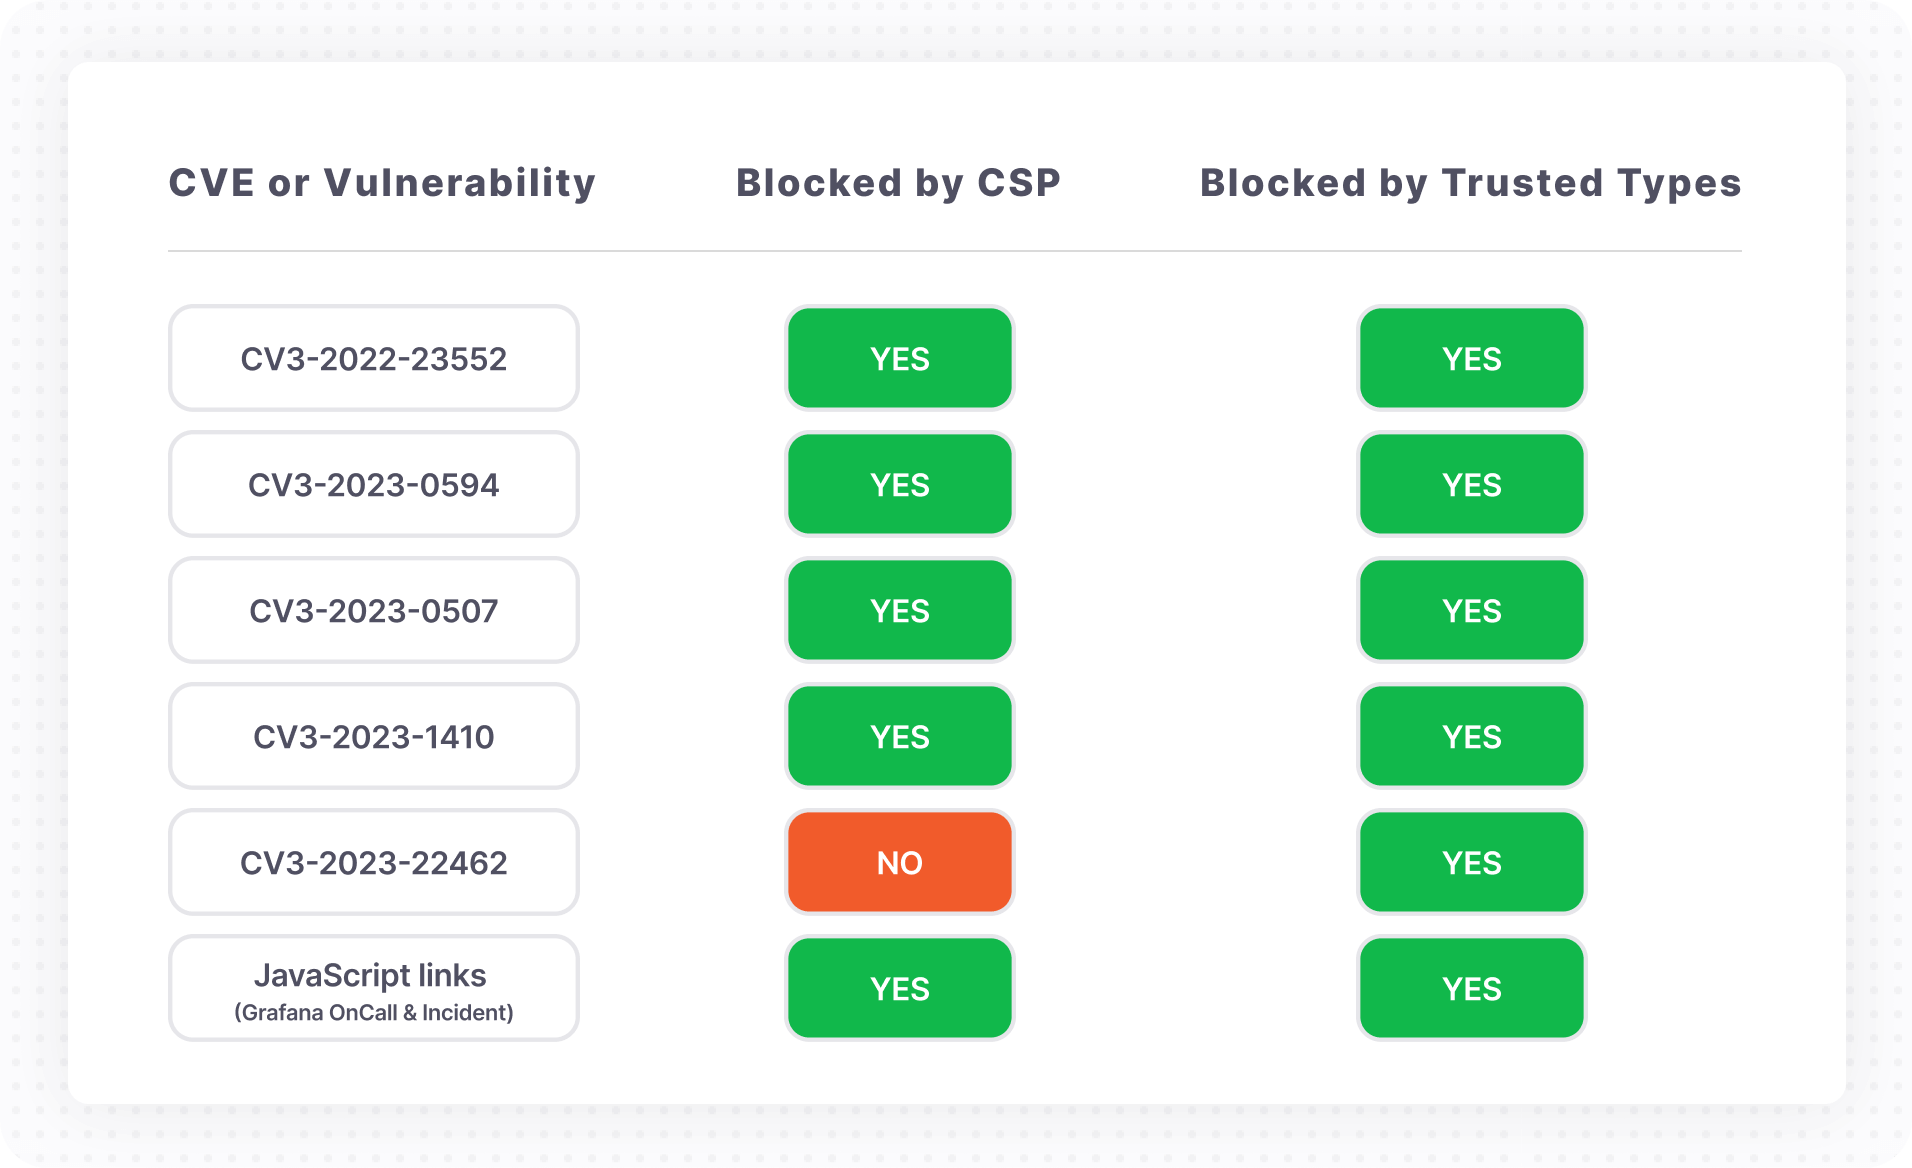 A chart shows how Trusted Types blocked all historical XXS vulnerabilities, including thoes not blocked by CSP.